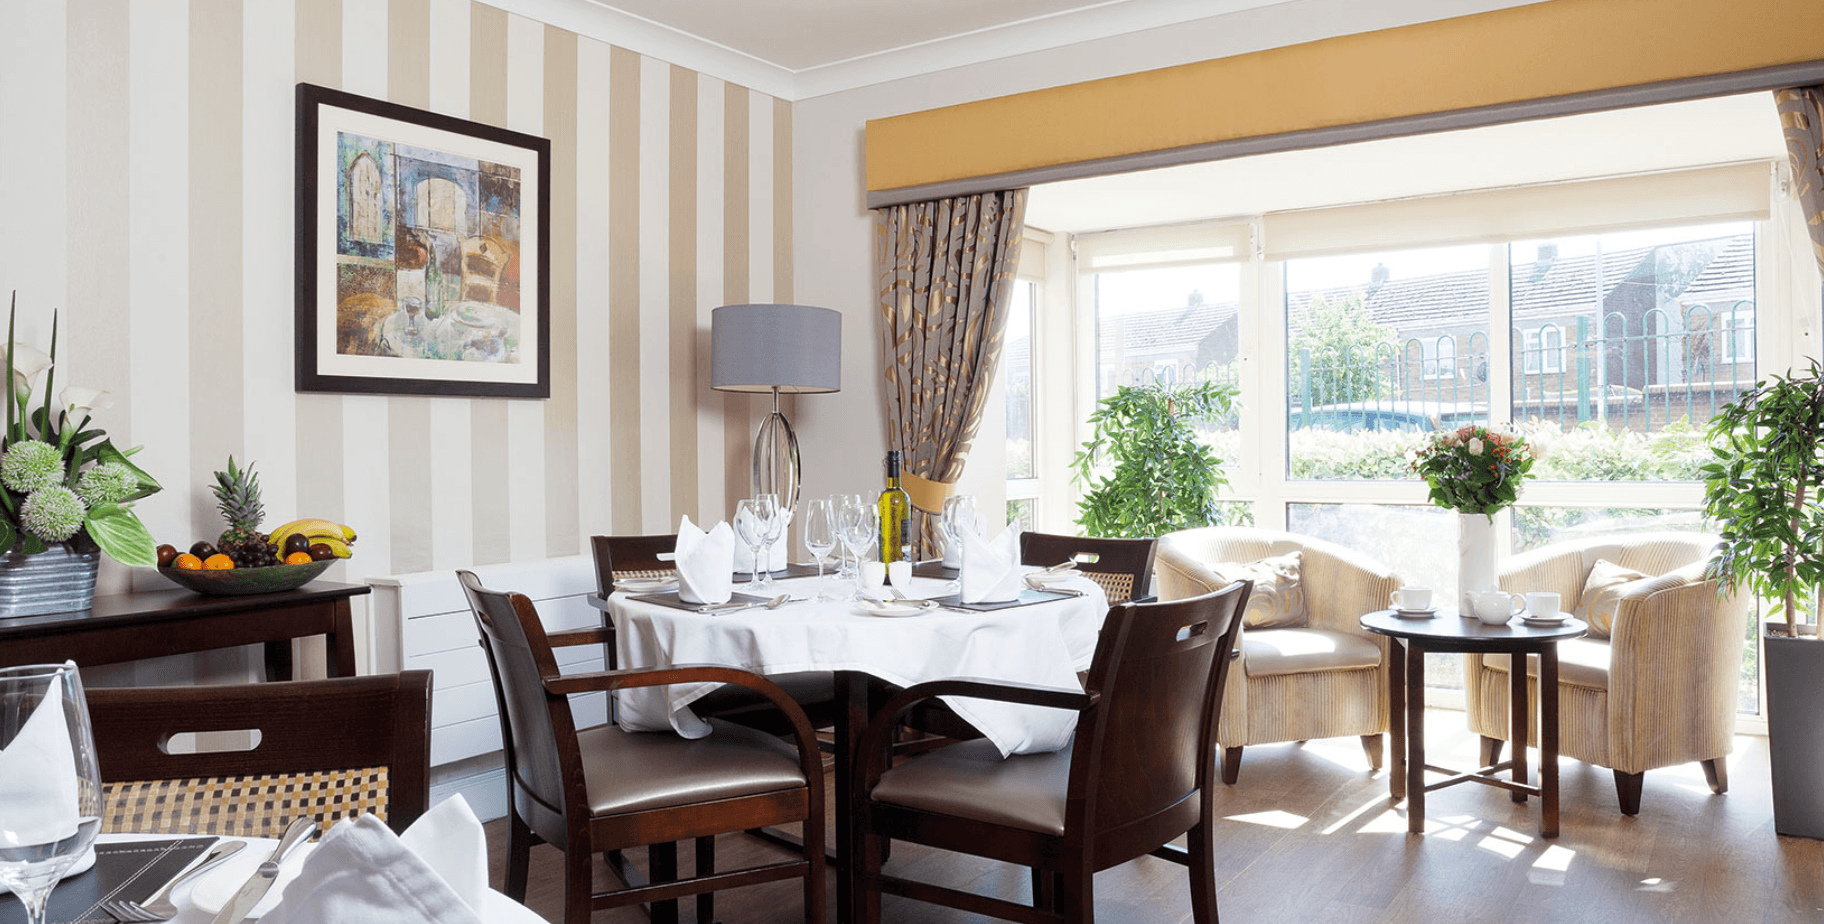 Dining Area at Primrose Hill Care Home in Huntingdon, Huntingdonshire